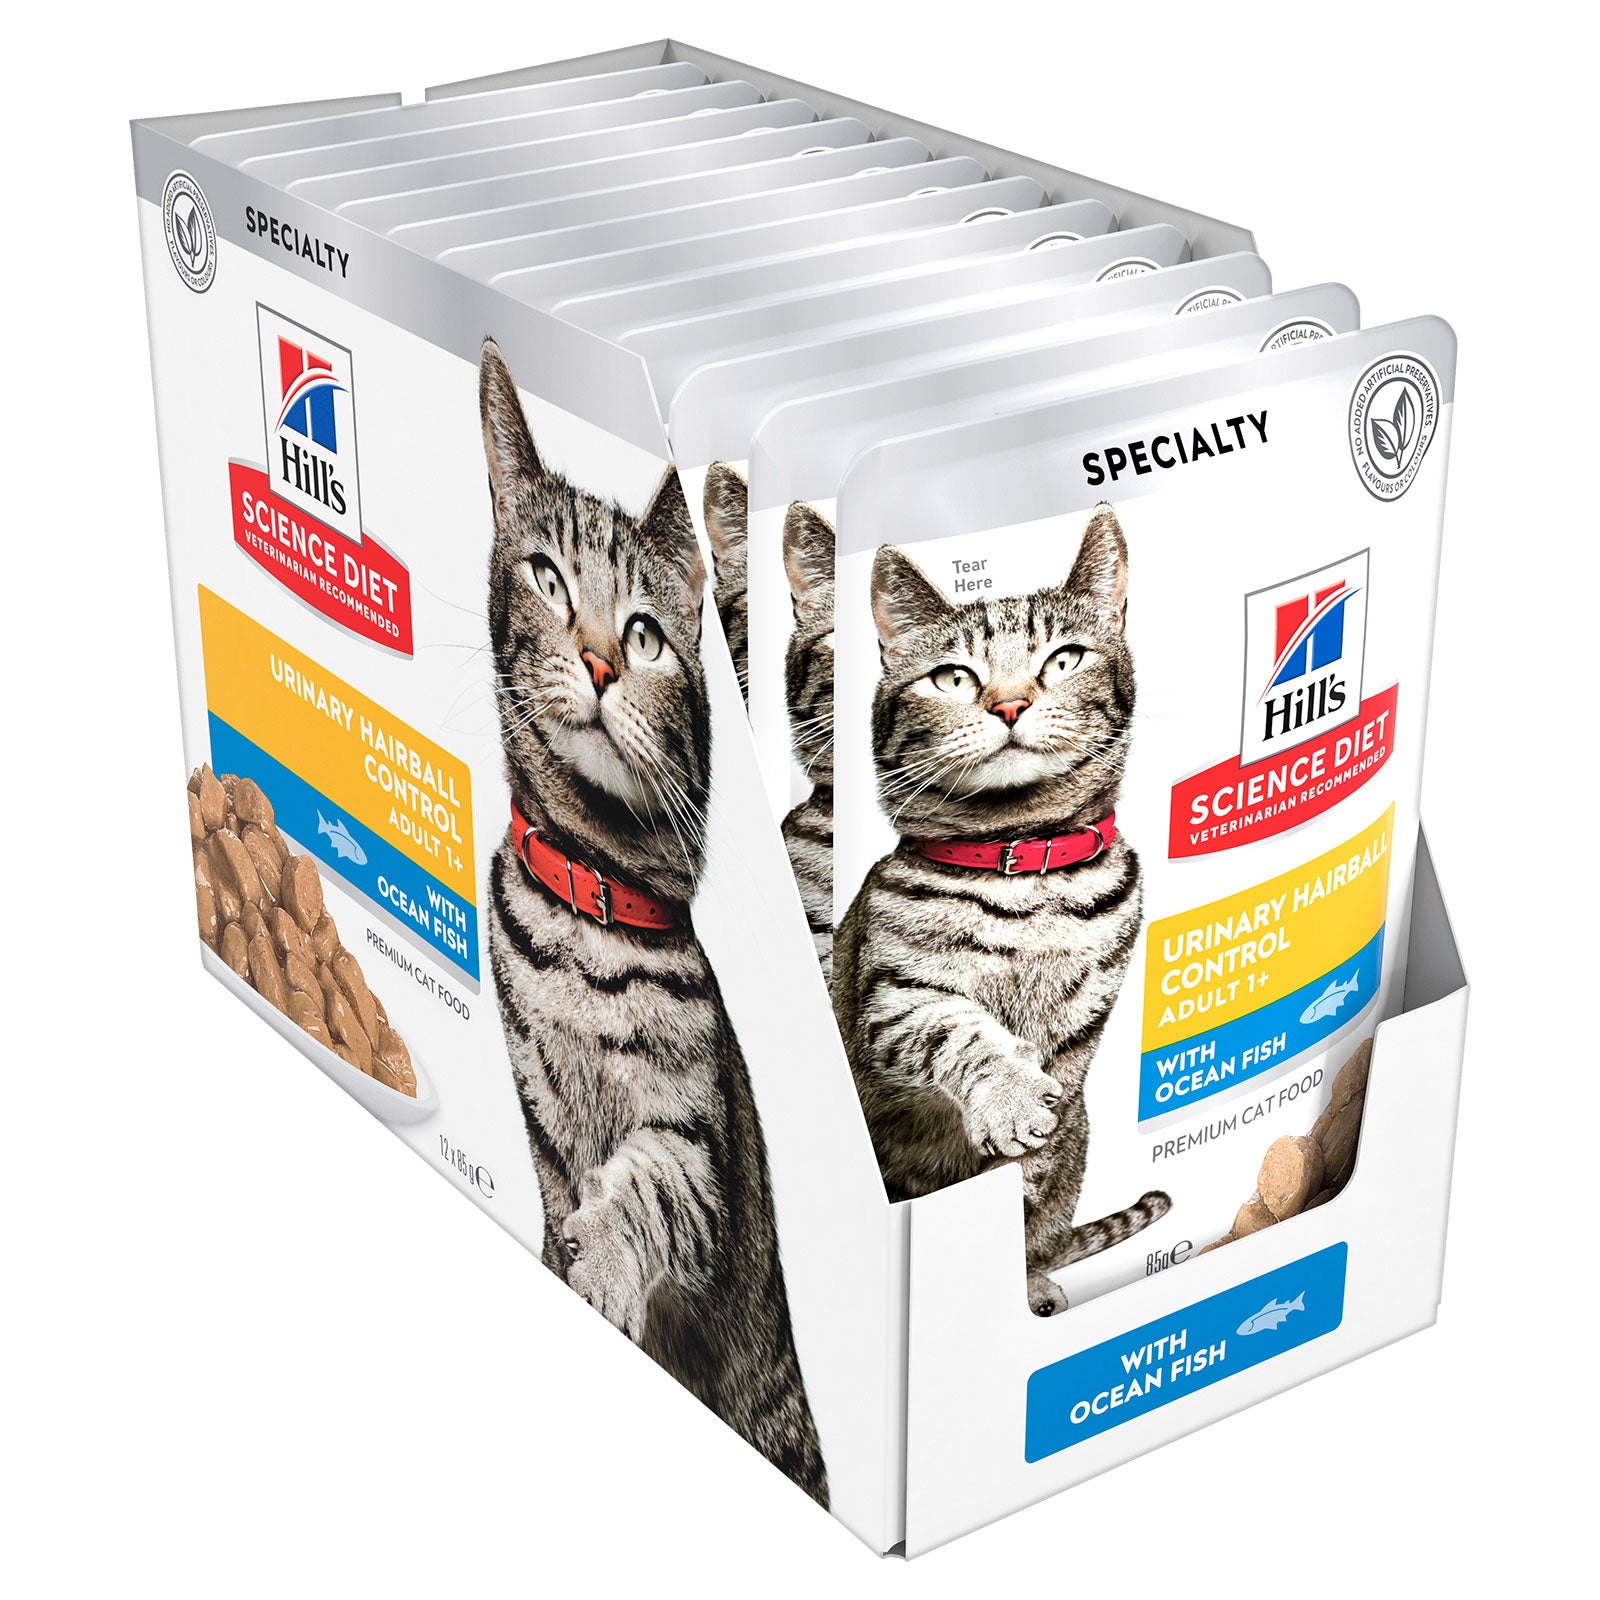 Hill's Science Diet Cat Food Pouch Adult Urinary Hairball Control Ocean Fish